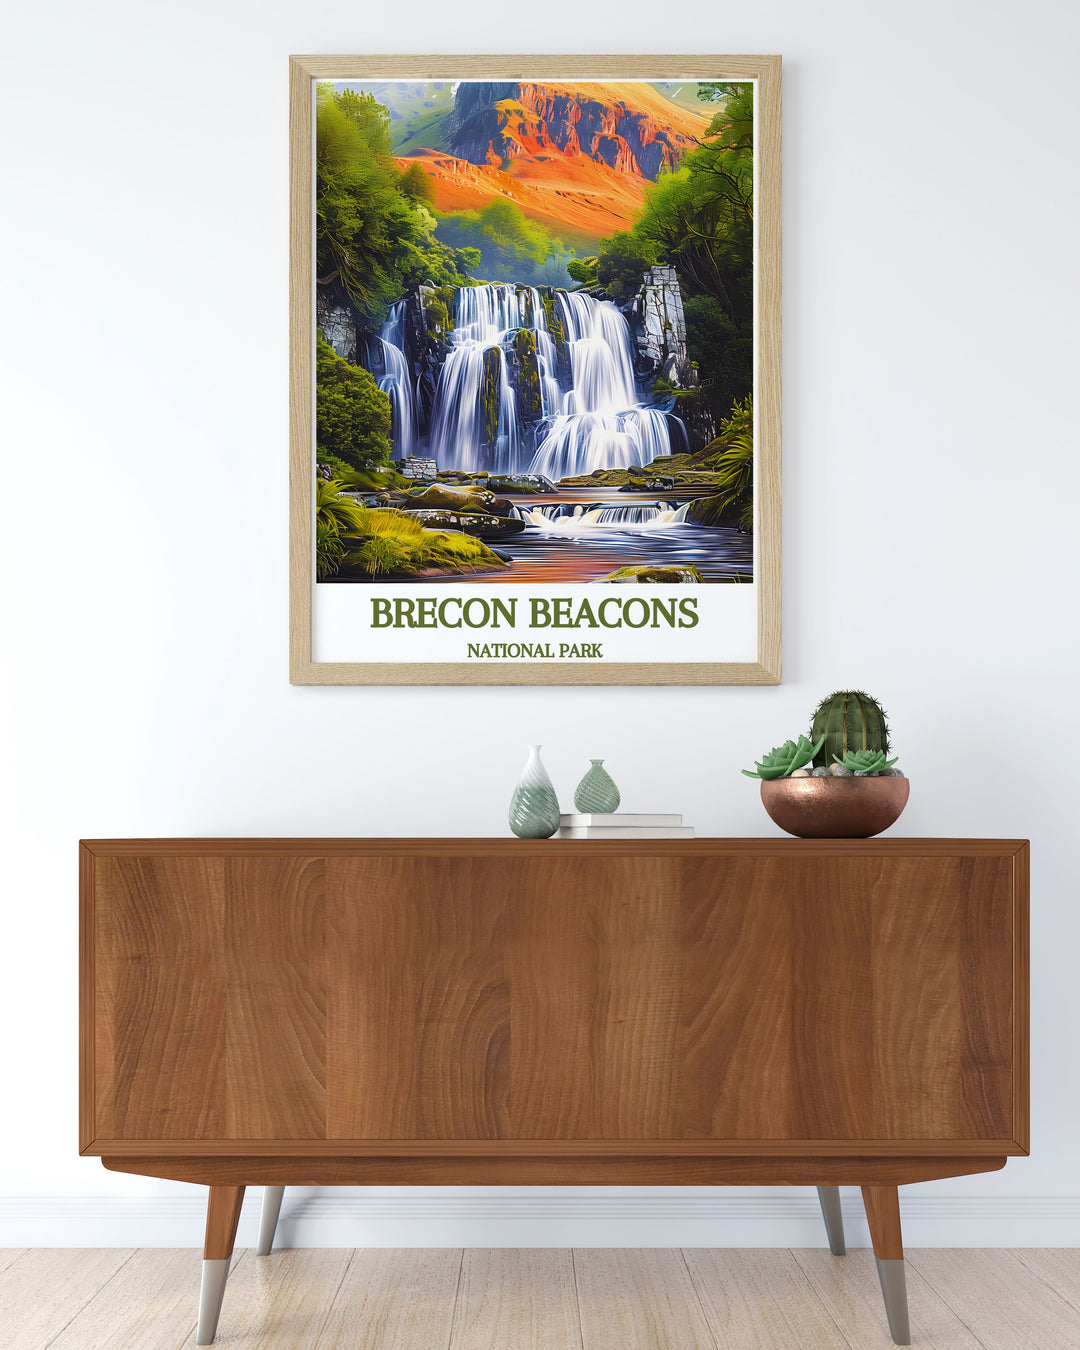 Vintage inspired poster of Brecon Beacons National Park, celebrating the diverse landscapes and natural heritage of South Wales. This artwork blends retro charm with contemporary design, capturing the timeless beauty of the park.